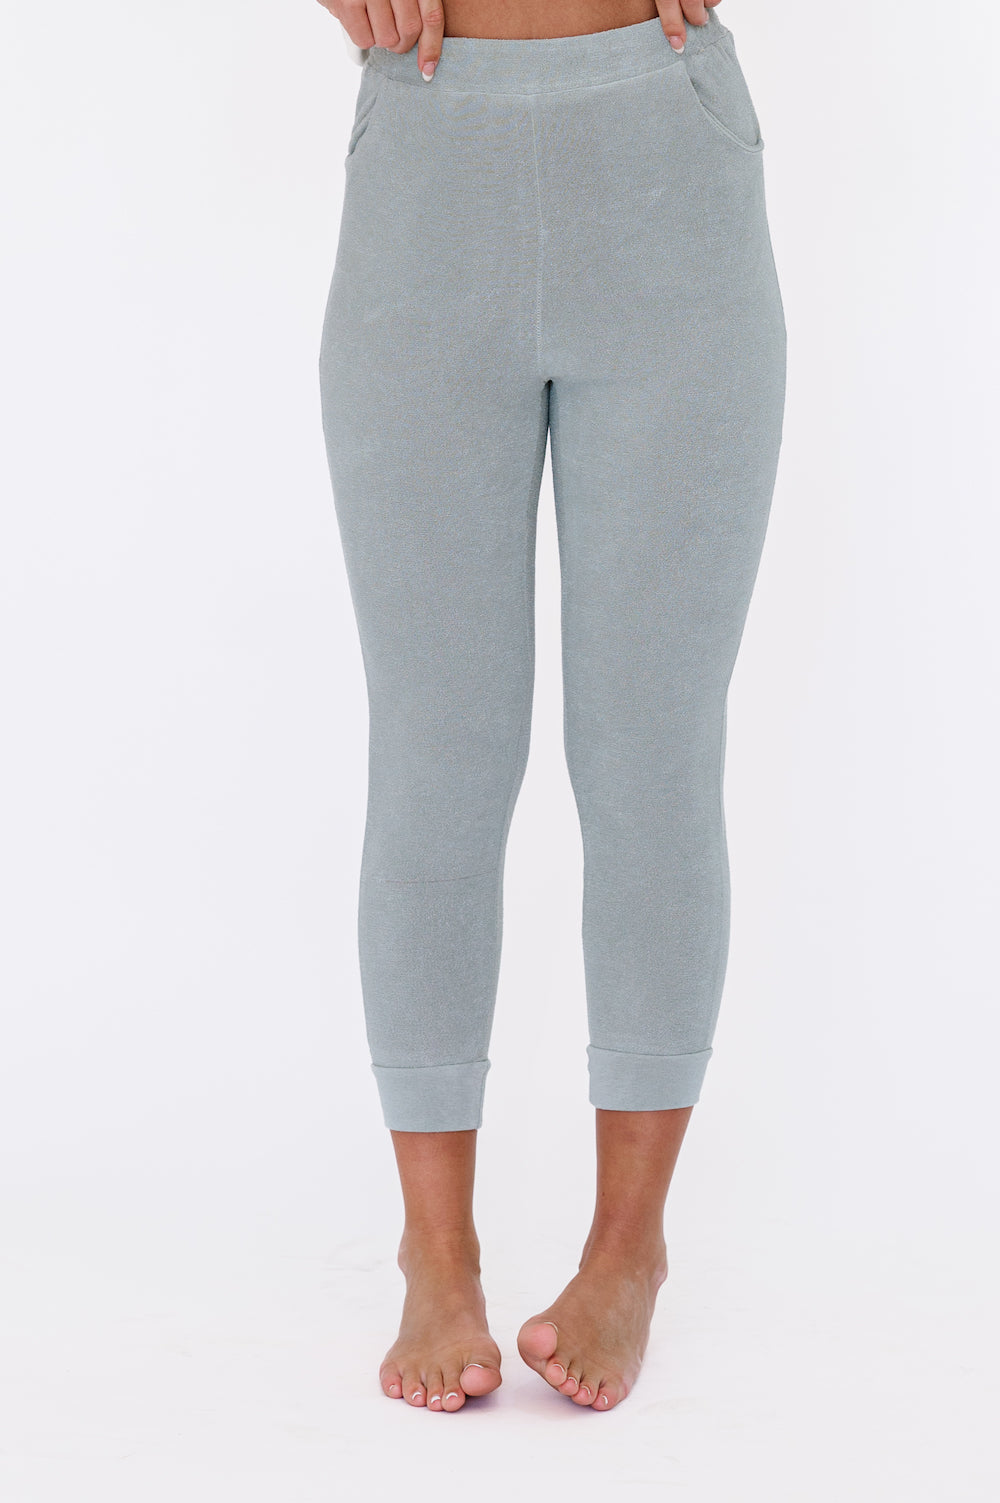 Jogger sweatpants in sage green